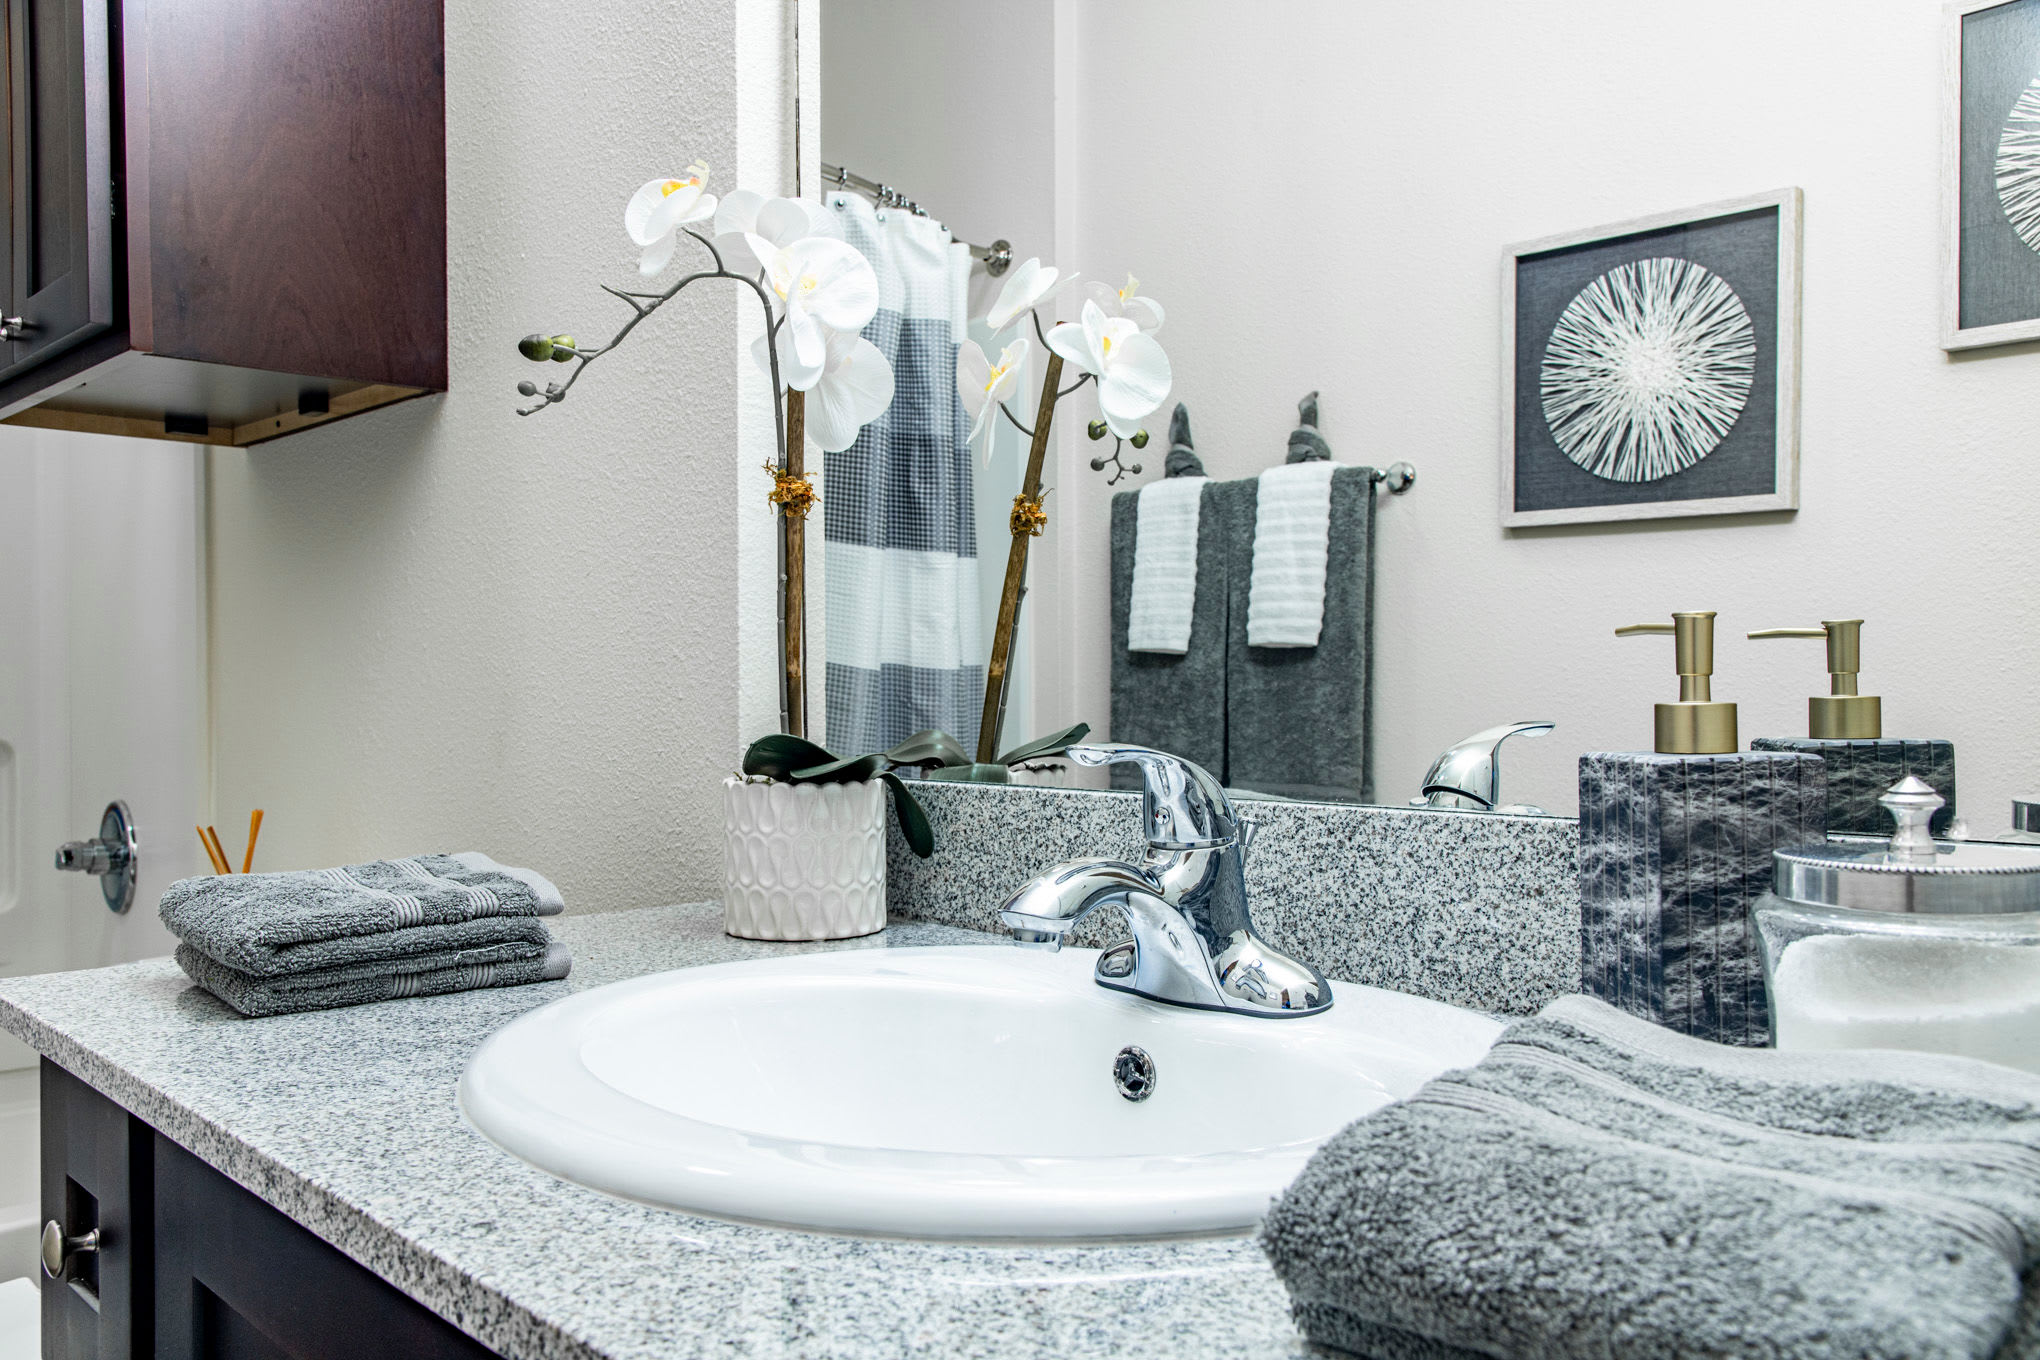 Granite countertops in an apartment bathroom at The Highland Club in Baton Rouge, Louisiana